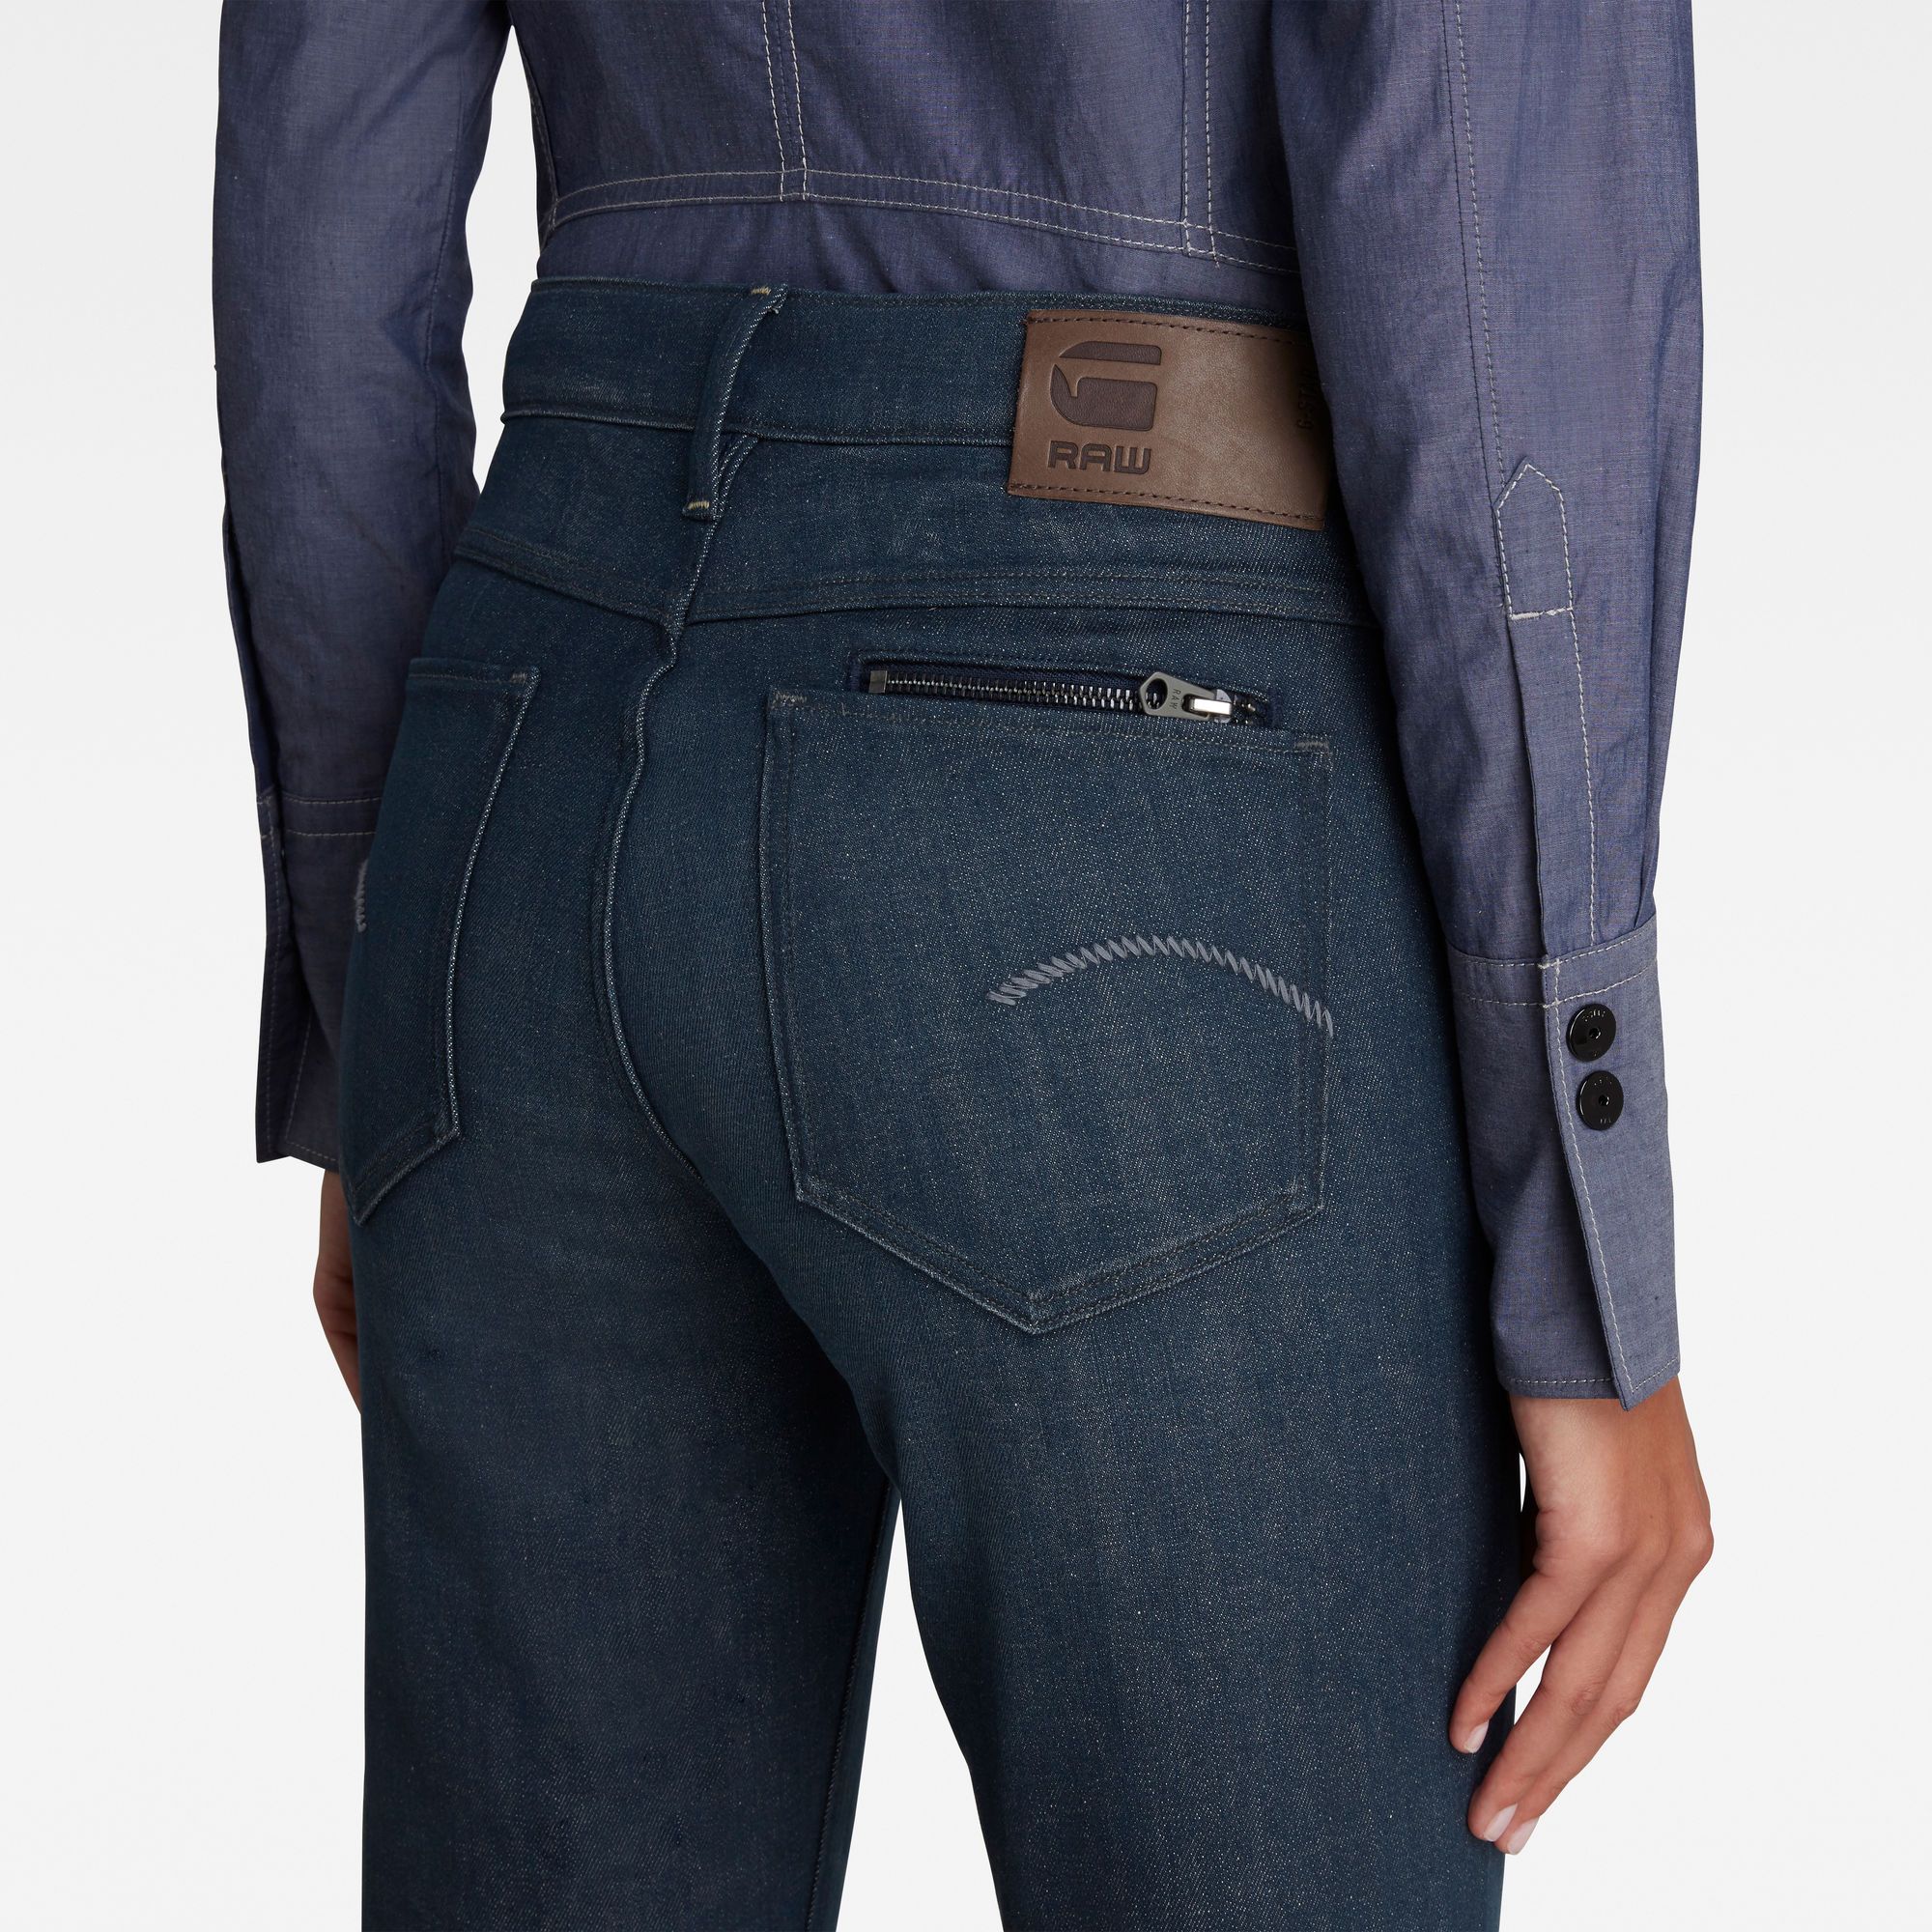 High waist. Delivered with turned up leg hem- option to unfold. Slim welt coin pocket. Back pockets with a zipper pocket inside one of them. Zip fly. Cow leather label at the back waist. Zip & button closure. Mid waist. This stretch denim is characterized by a unique dyeing shade. Indigo is combined with an industrial grey, which starts as dark grey and washes down into blue. This organic cotton fabric is enriched with a Lycra® stretch fiber to create a comfortable wear. 10.5 oz stretch denim, 3x1 right hand twill construction. Straight